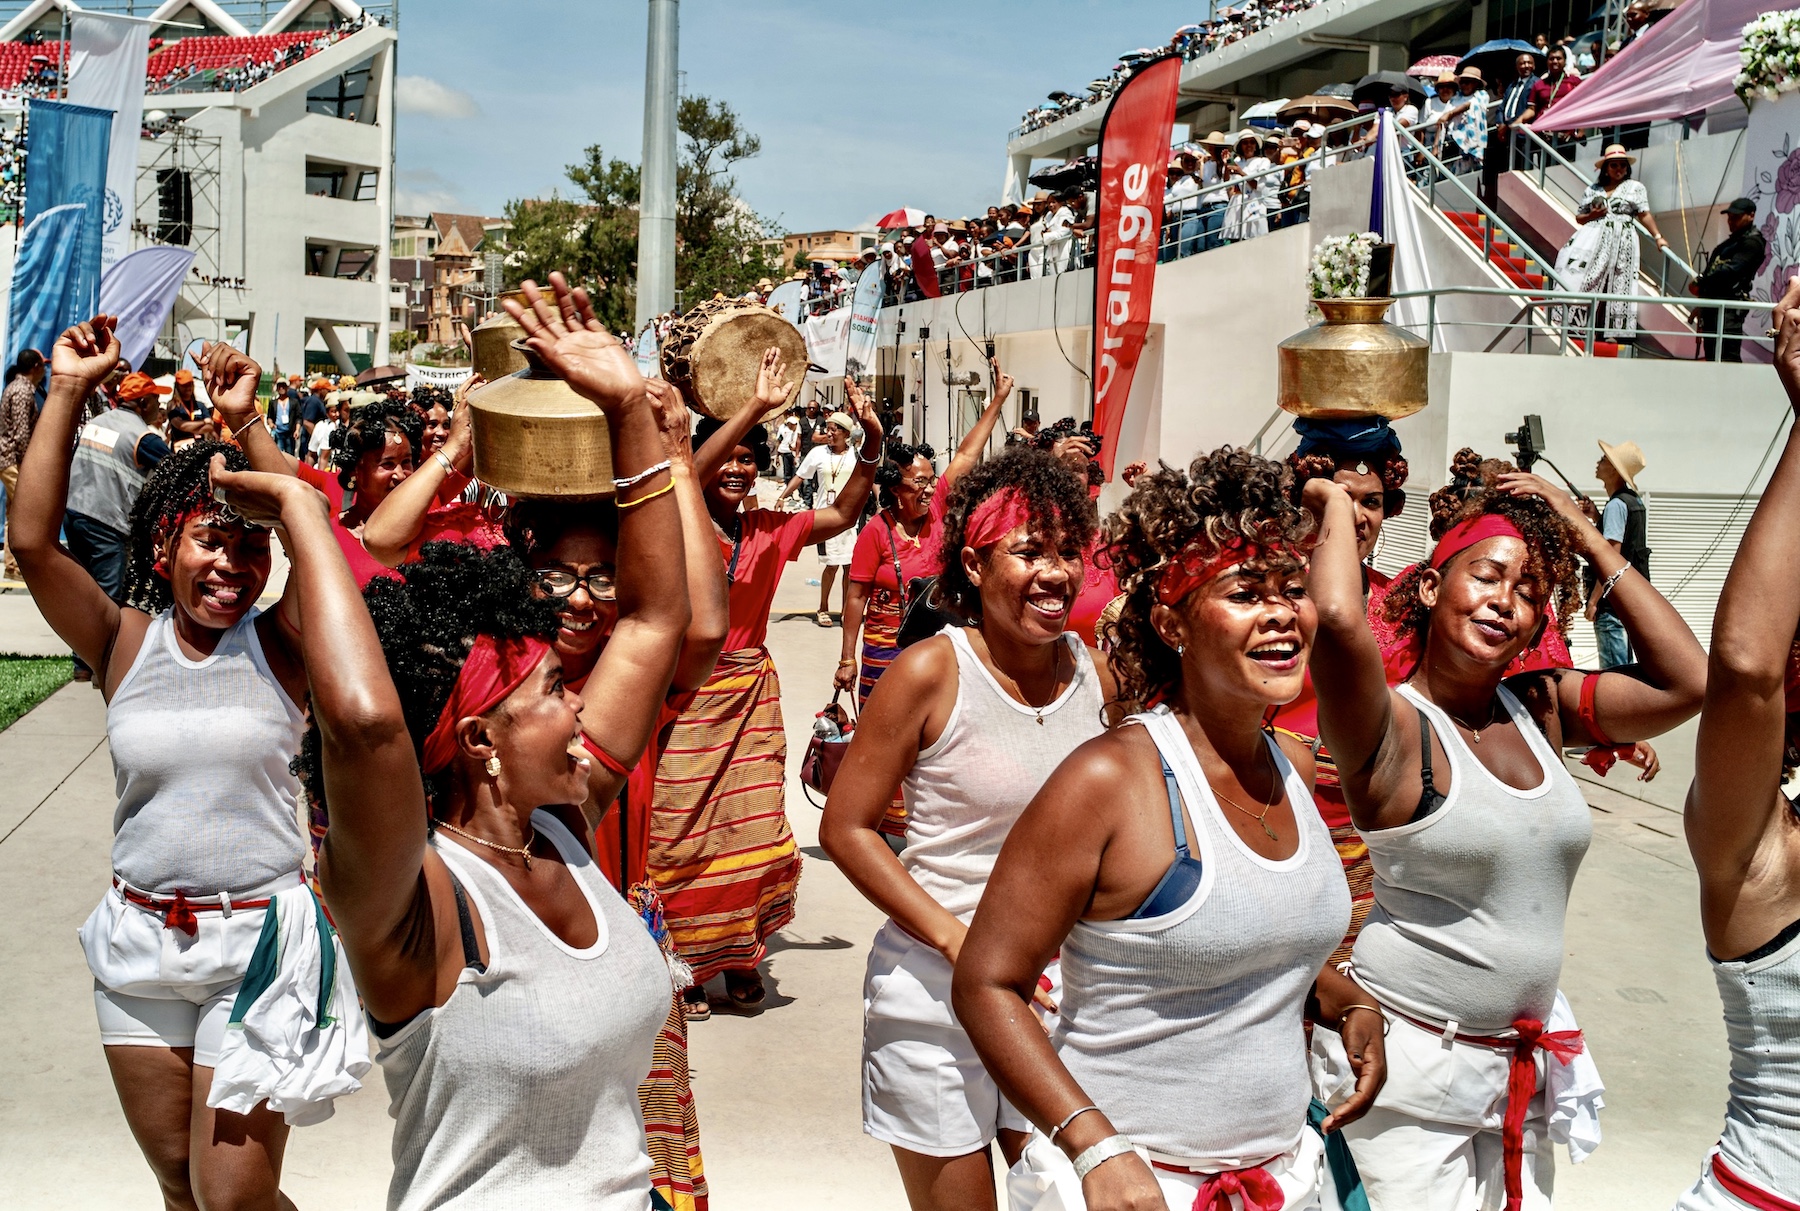 On International Women's Day in Madagascar, women march in a parade while sporting red and white headbands.